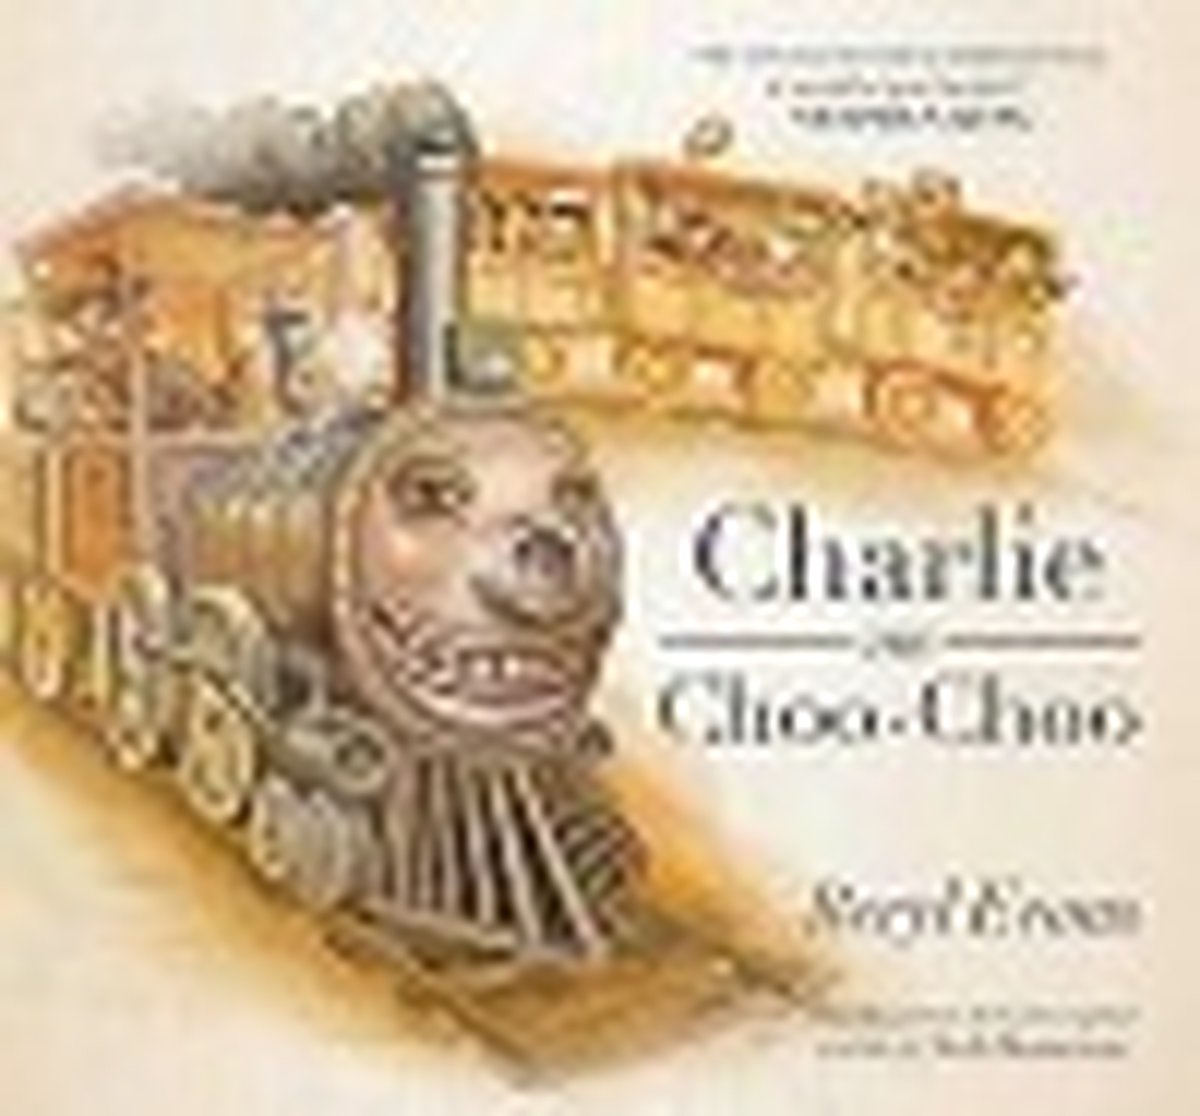 Charlie the choo-choo: From the World of the Dark Tower